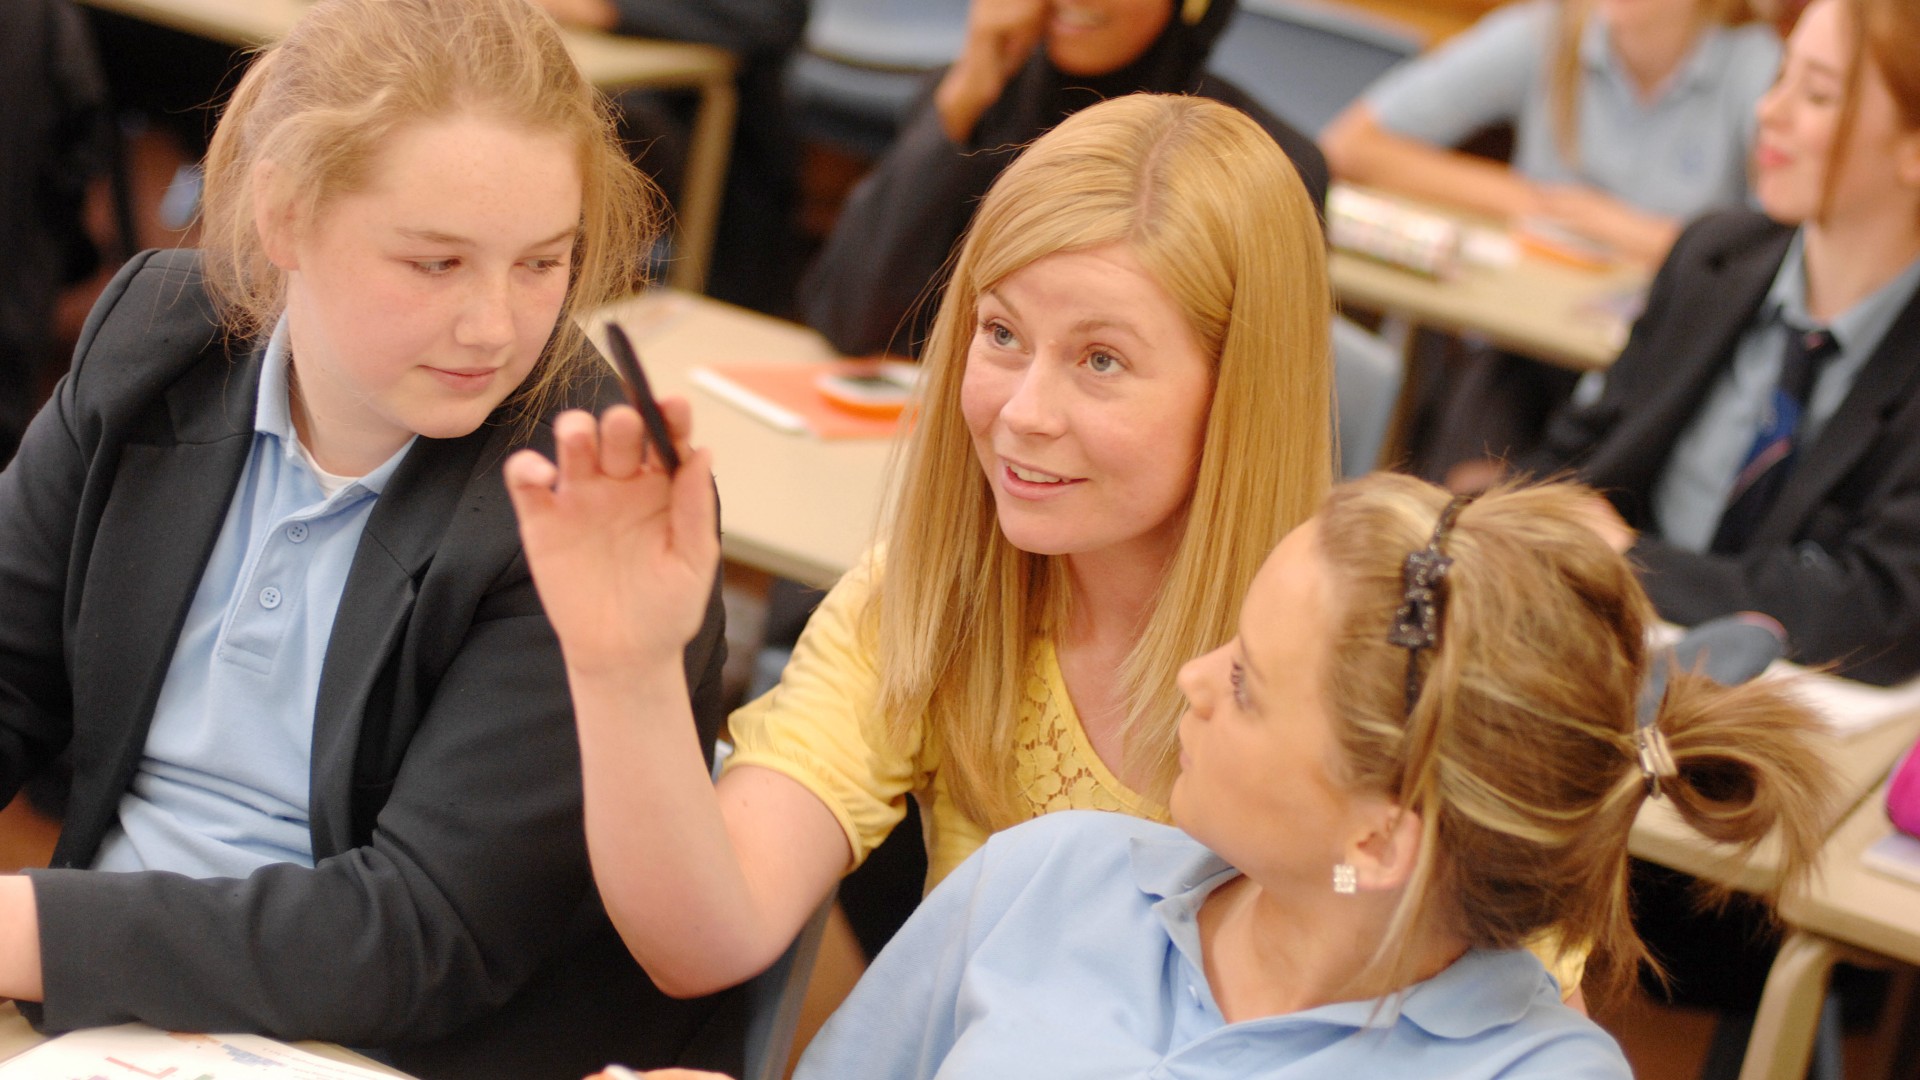 A teacher is sat in between two students pointing at something that is off-camera.